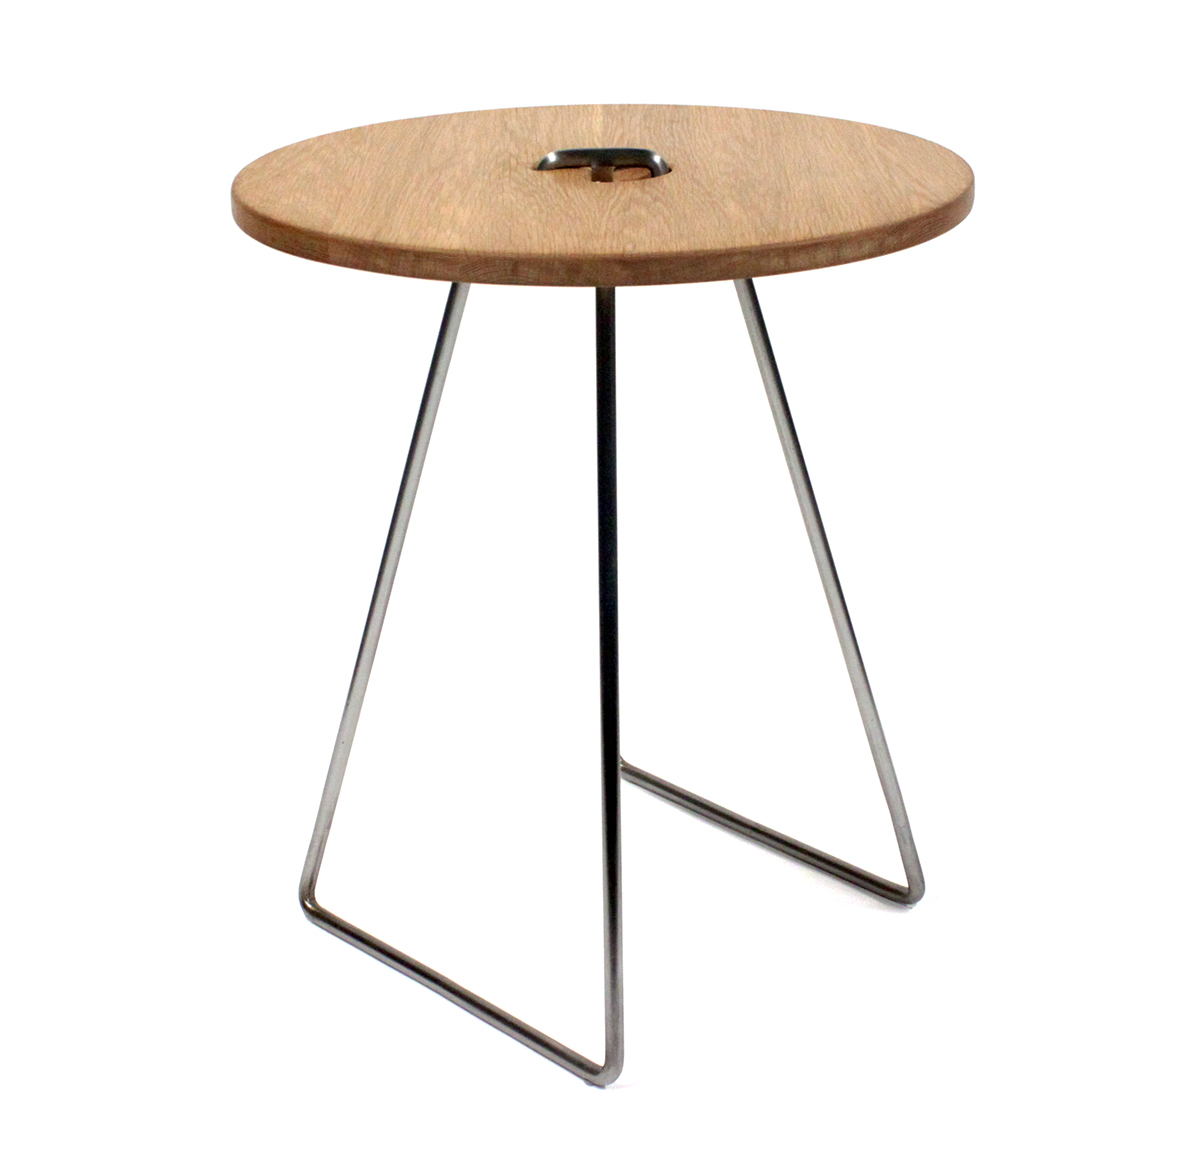 cafe table wood Coffee furniture design